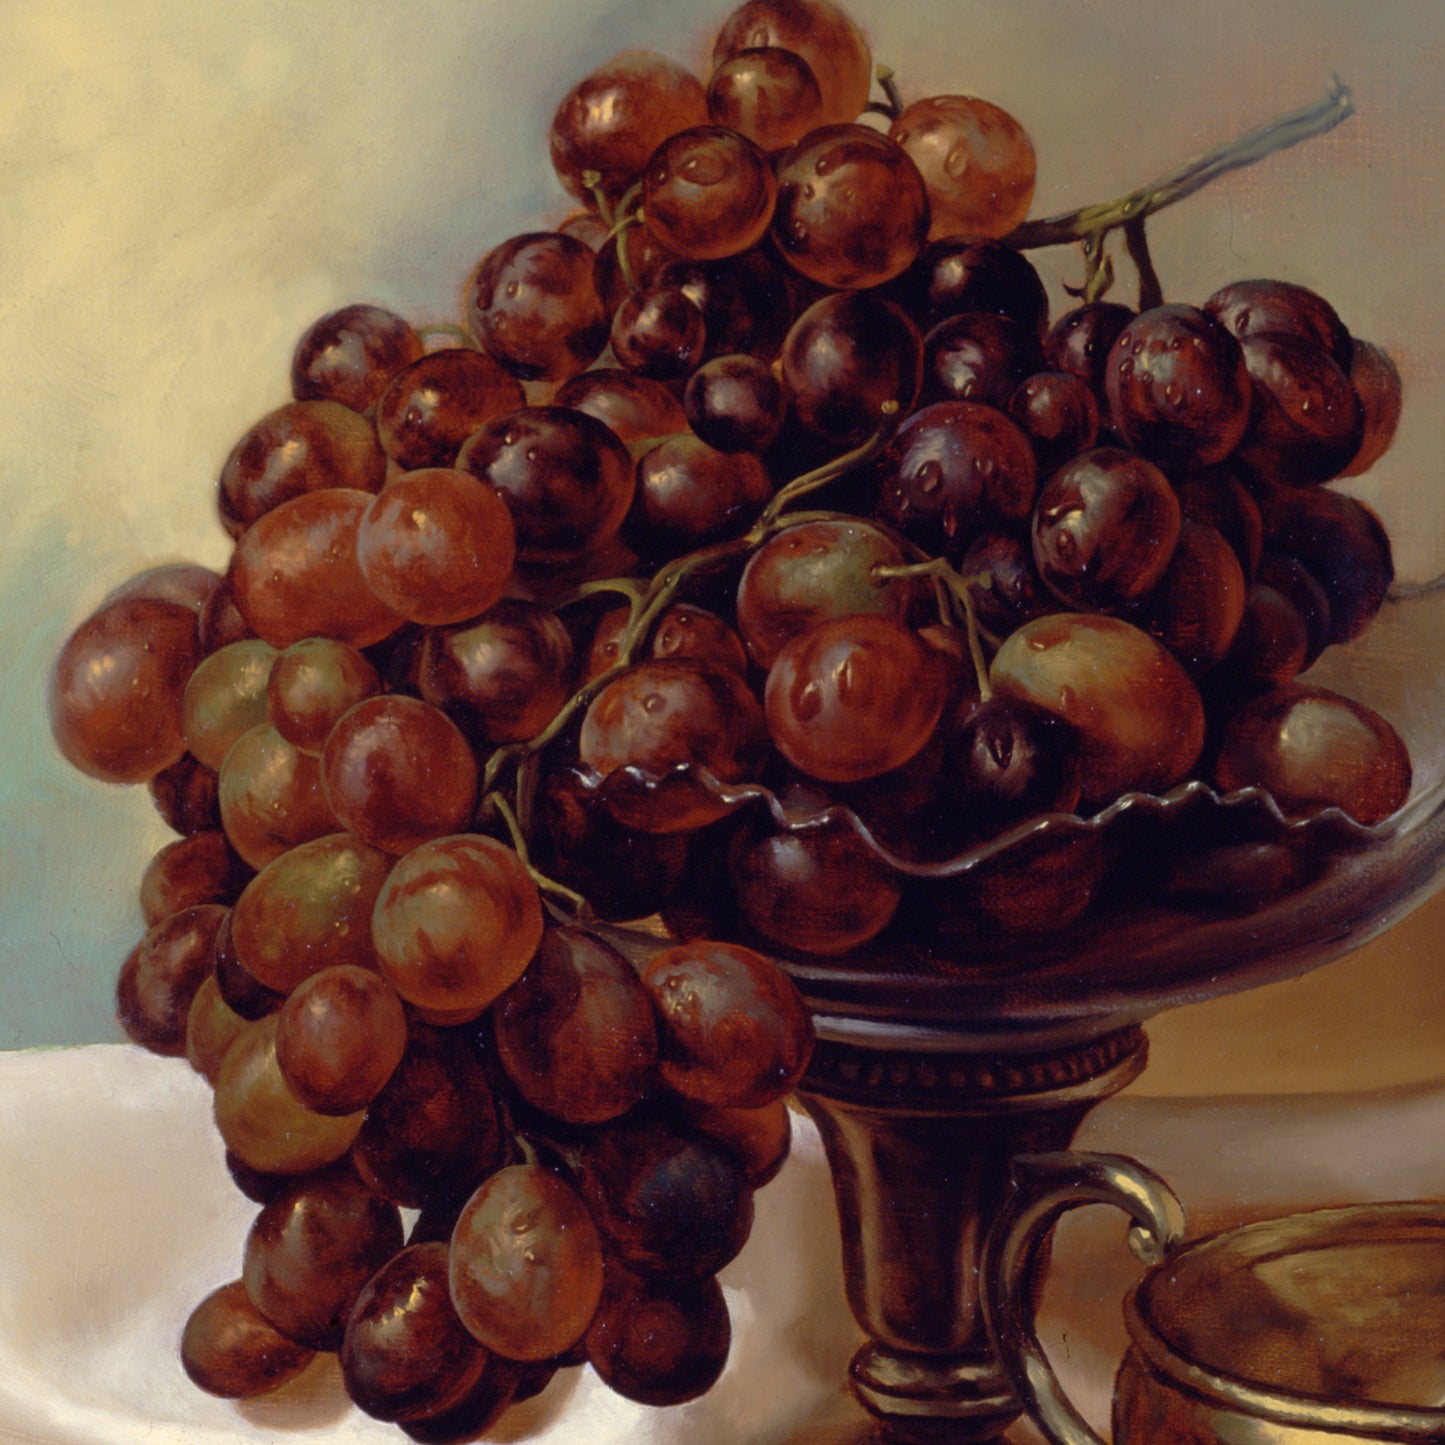 a painting of a white porcelain plate next to grapes, in the style of light amber and bronze, academic realism, biblical grandeur, realist detail, light maroon and bronze,  hudson river school 